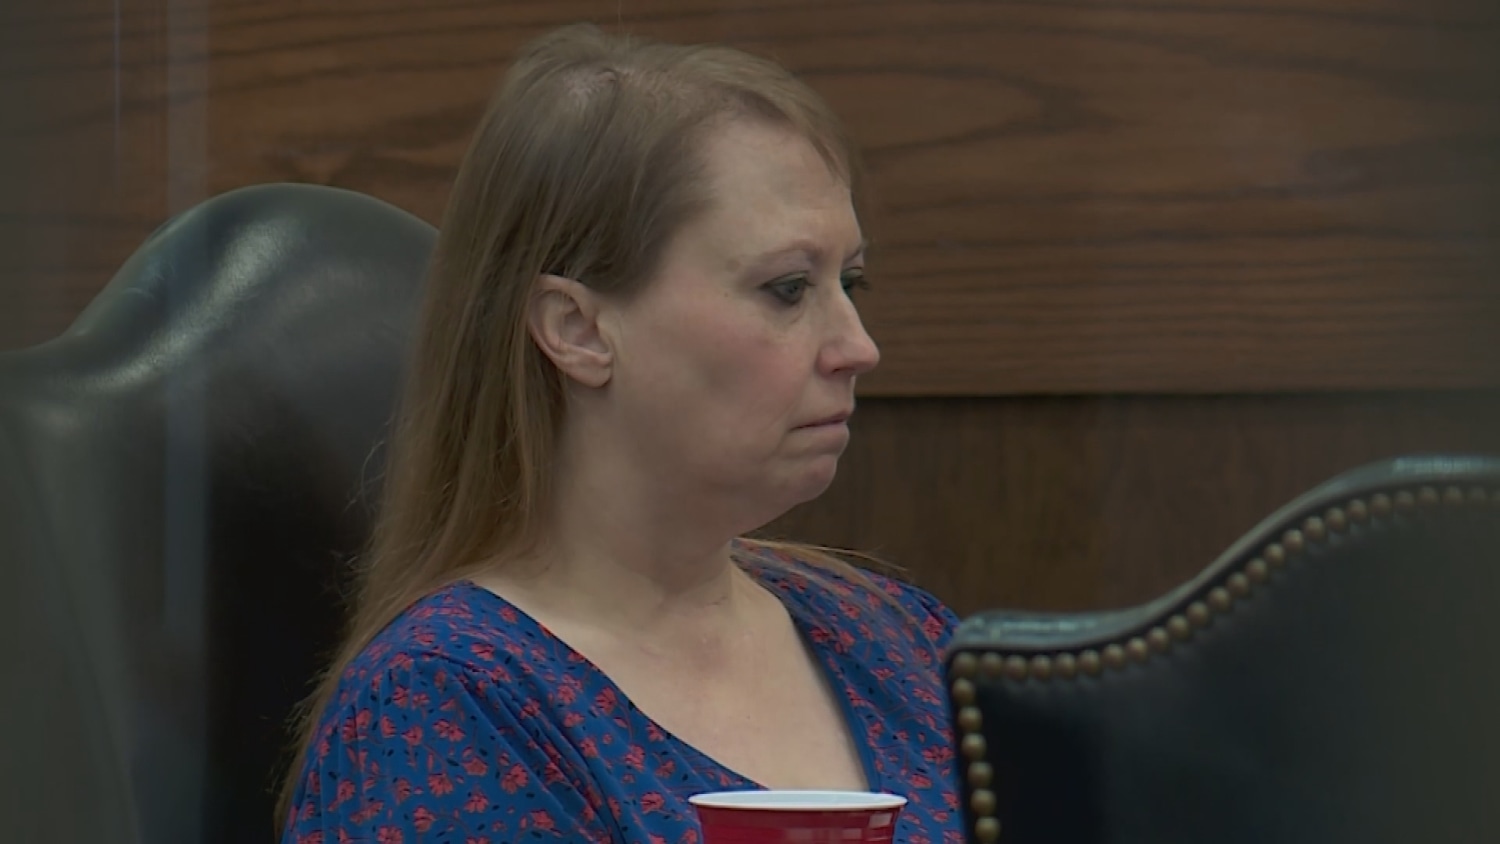 Oklahoma woman gets life in prison after admitting she asked her lover to kill her allegedly abusive pastor husband pic